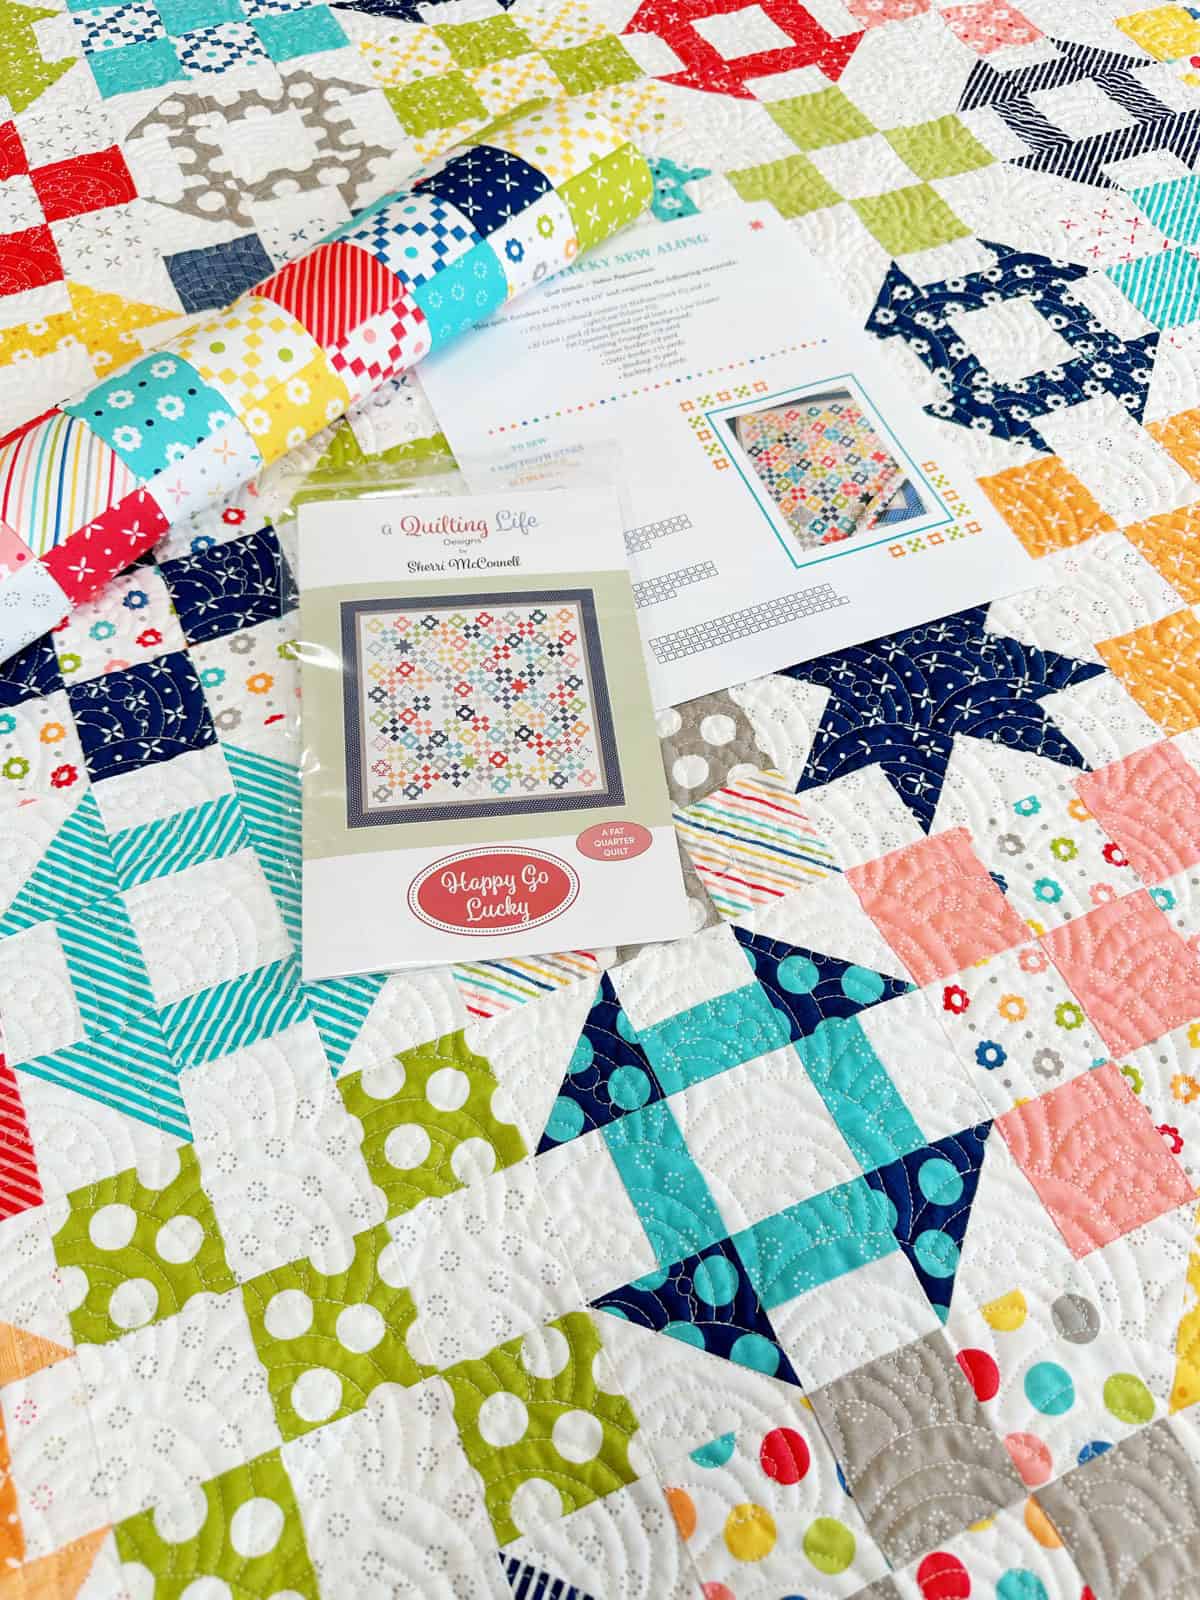 Scrappy patchwork Happy Go Lucky Quilt by Sherri from A Quilting Life